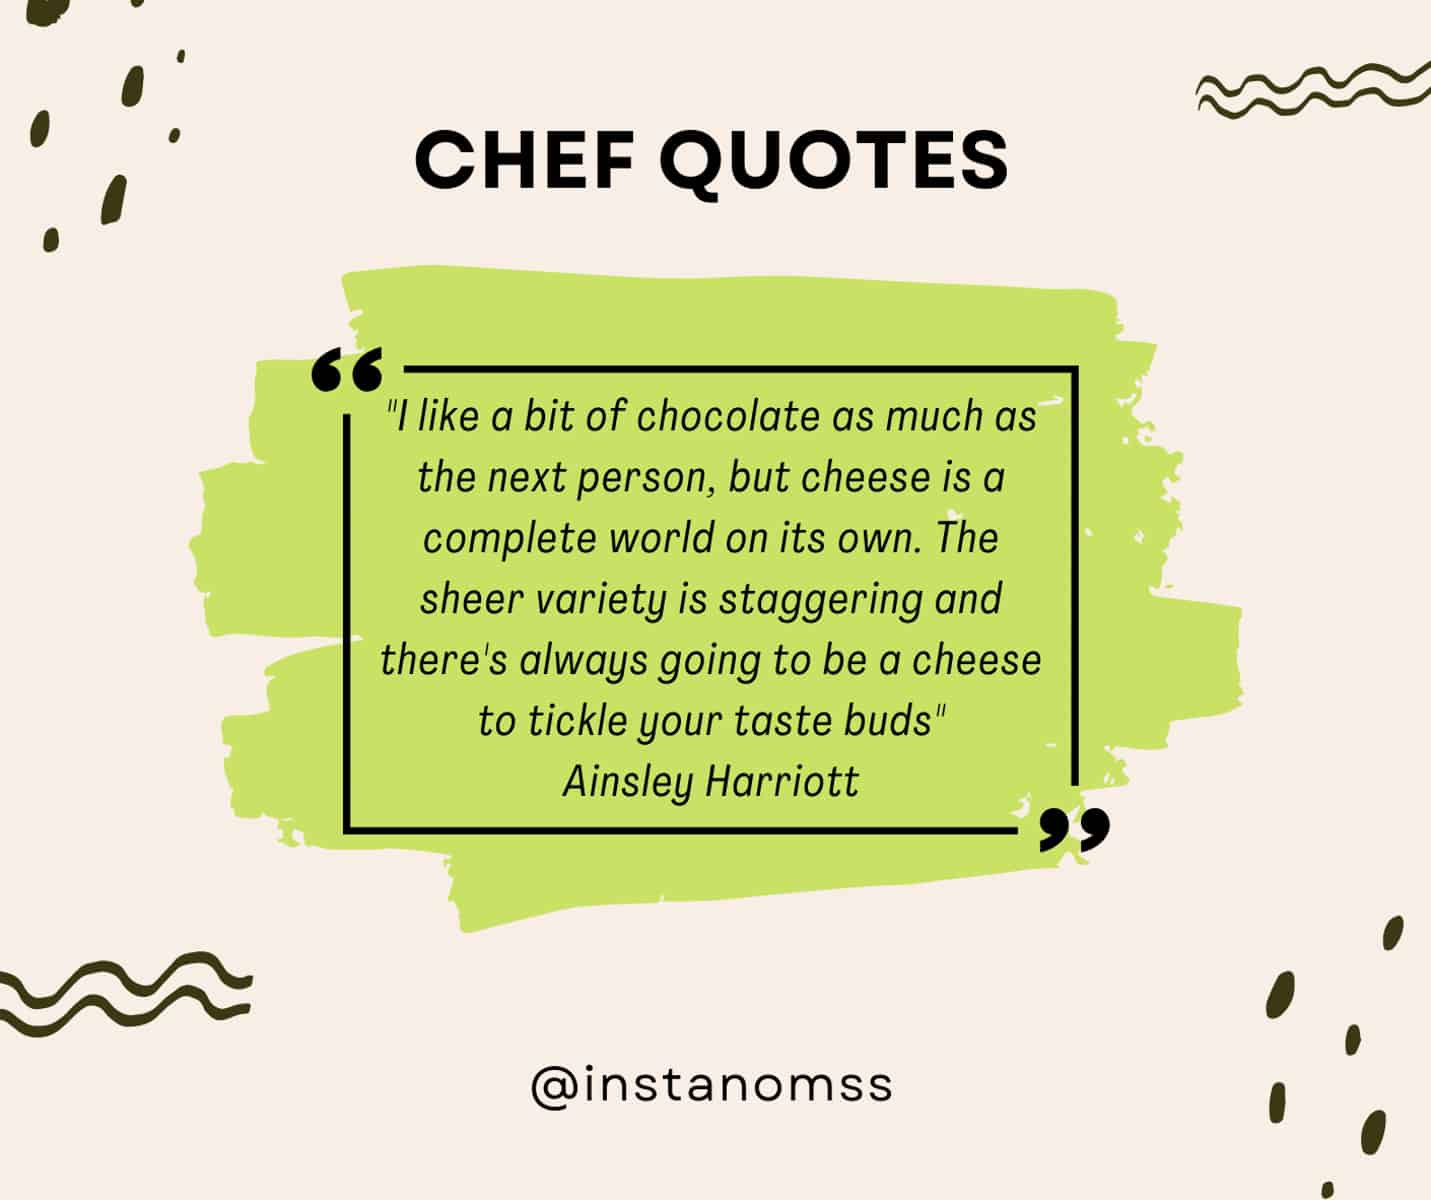 "I like a bit of chocolate as much as the next person, but cheese is a complete world on its own. The sheer variety is staggering and there's always going to be a cheese to tickle your taste buds" Ainsley Harriott